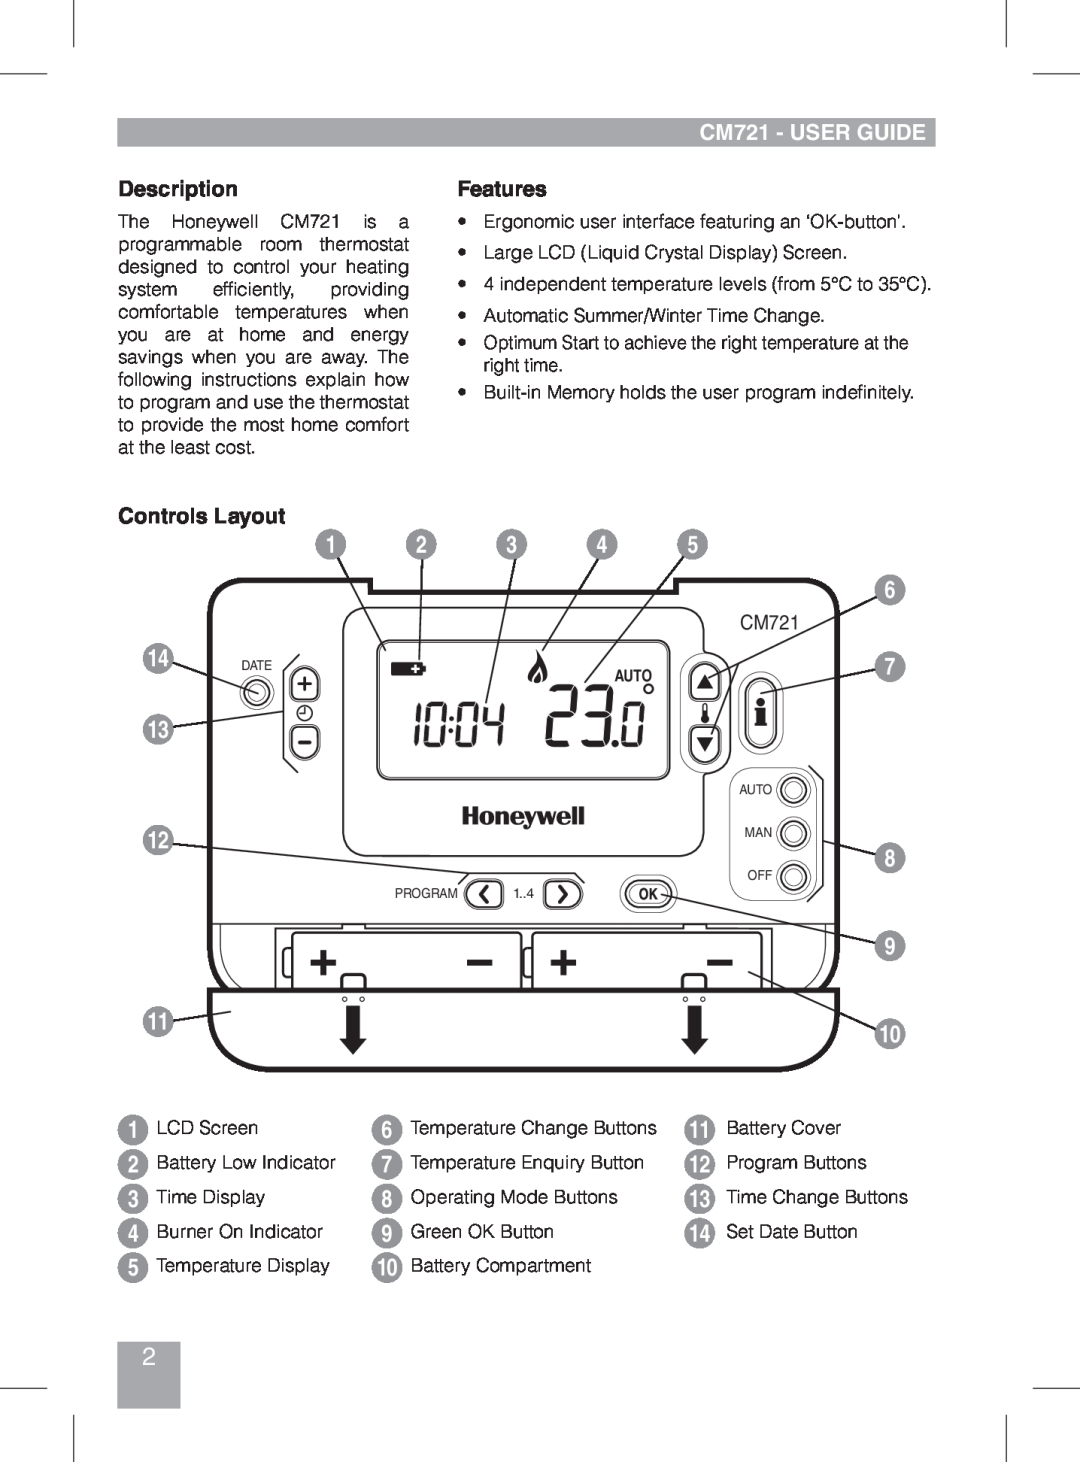 Honeywell manual Description, CM721 - USER GUIDE, Features, Controls Layout 